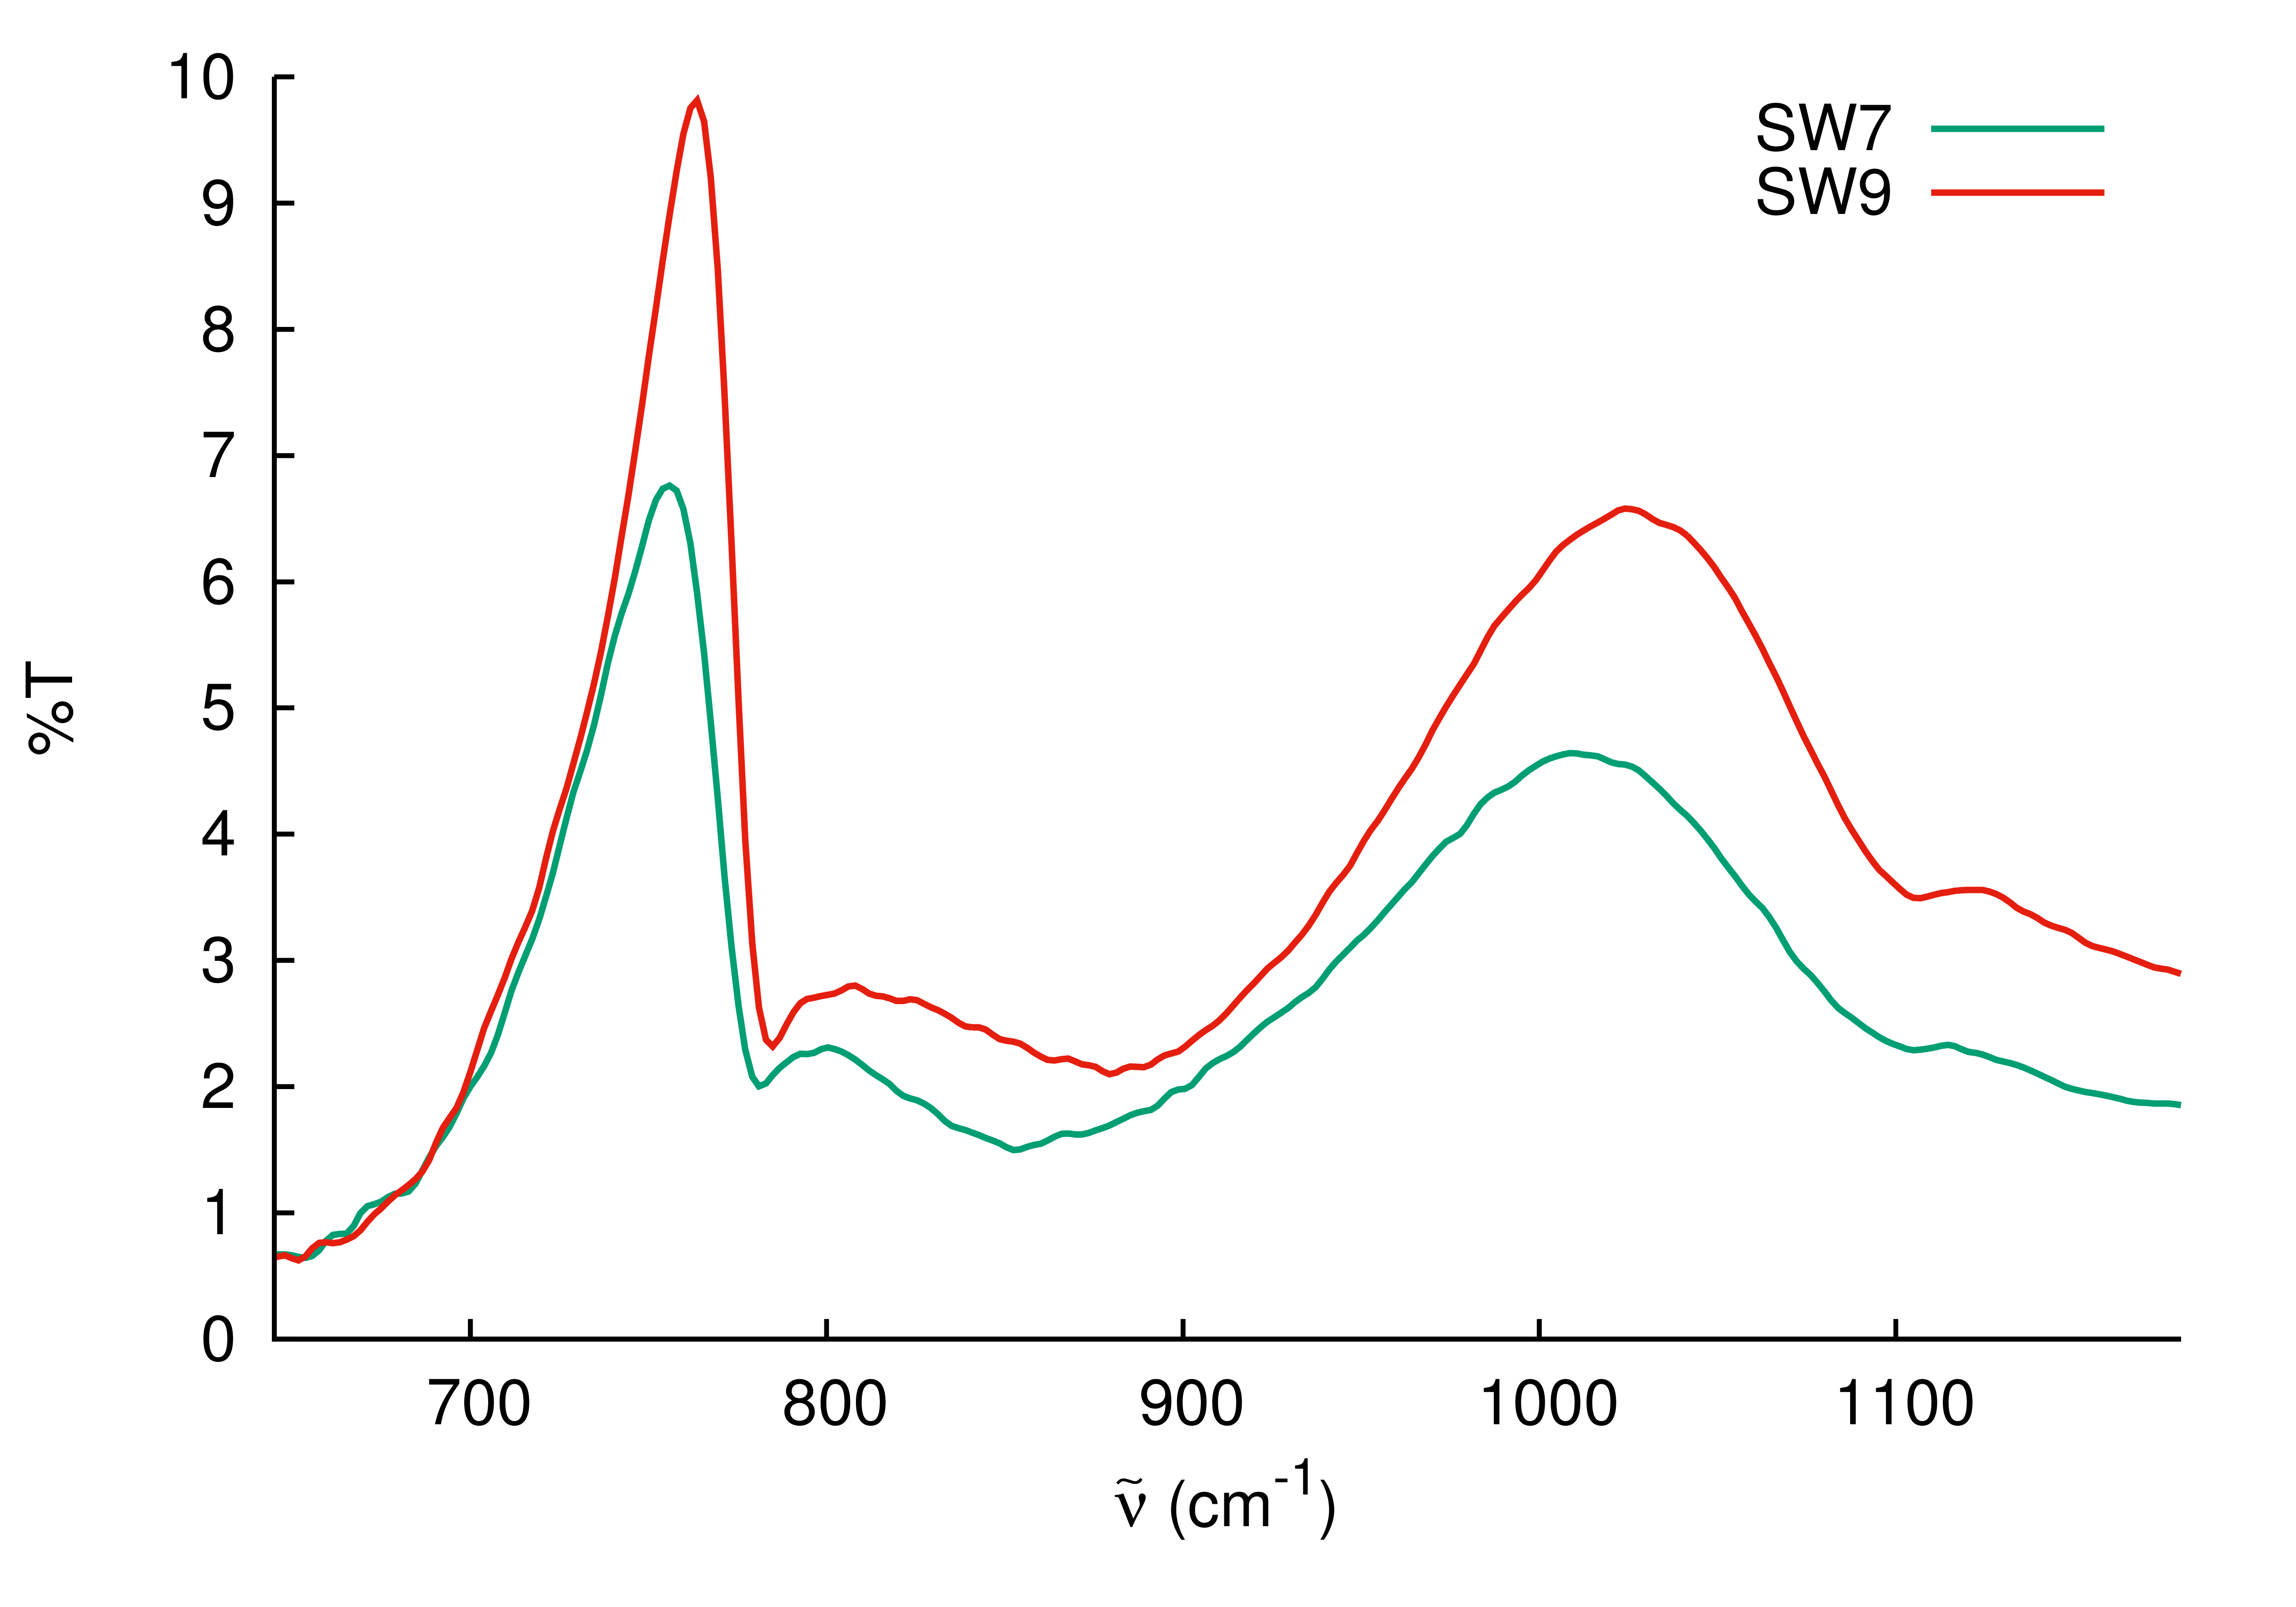 Transmission spectrum of a mesh with and without M. luteus zoomed in on the region from 500 - 1200 wavenumbers.